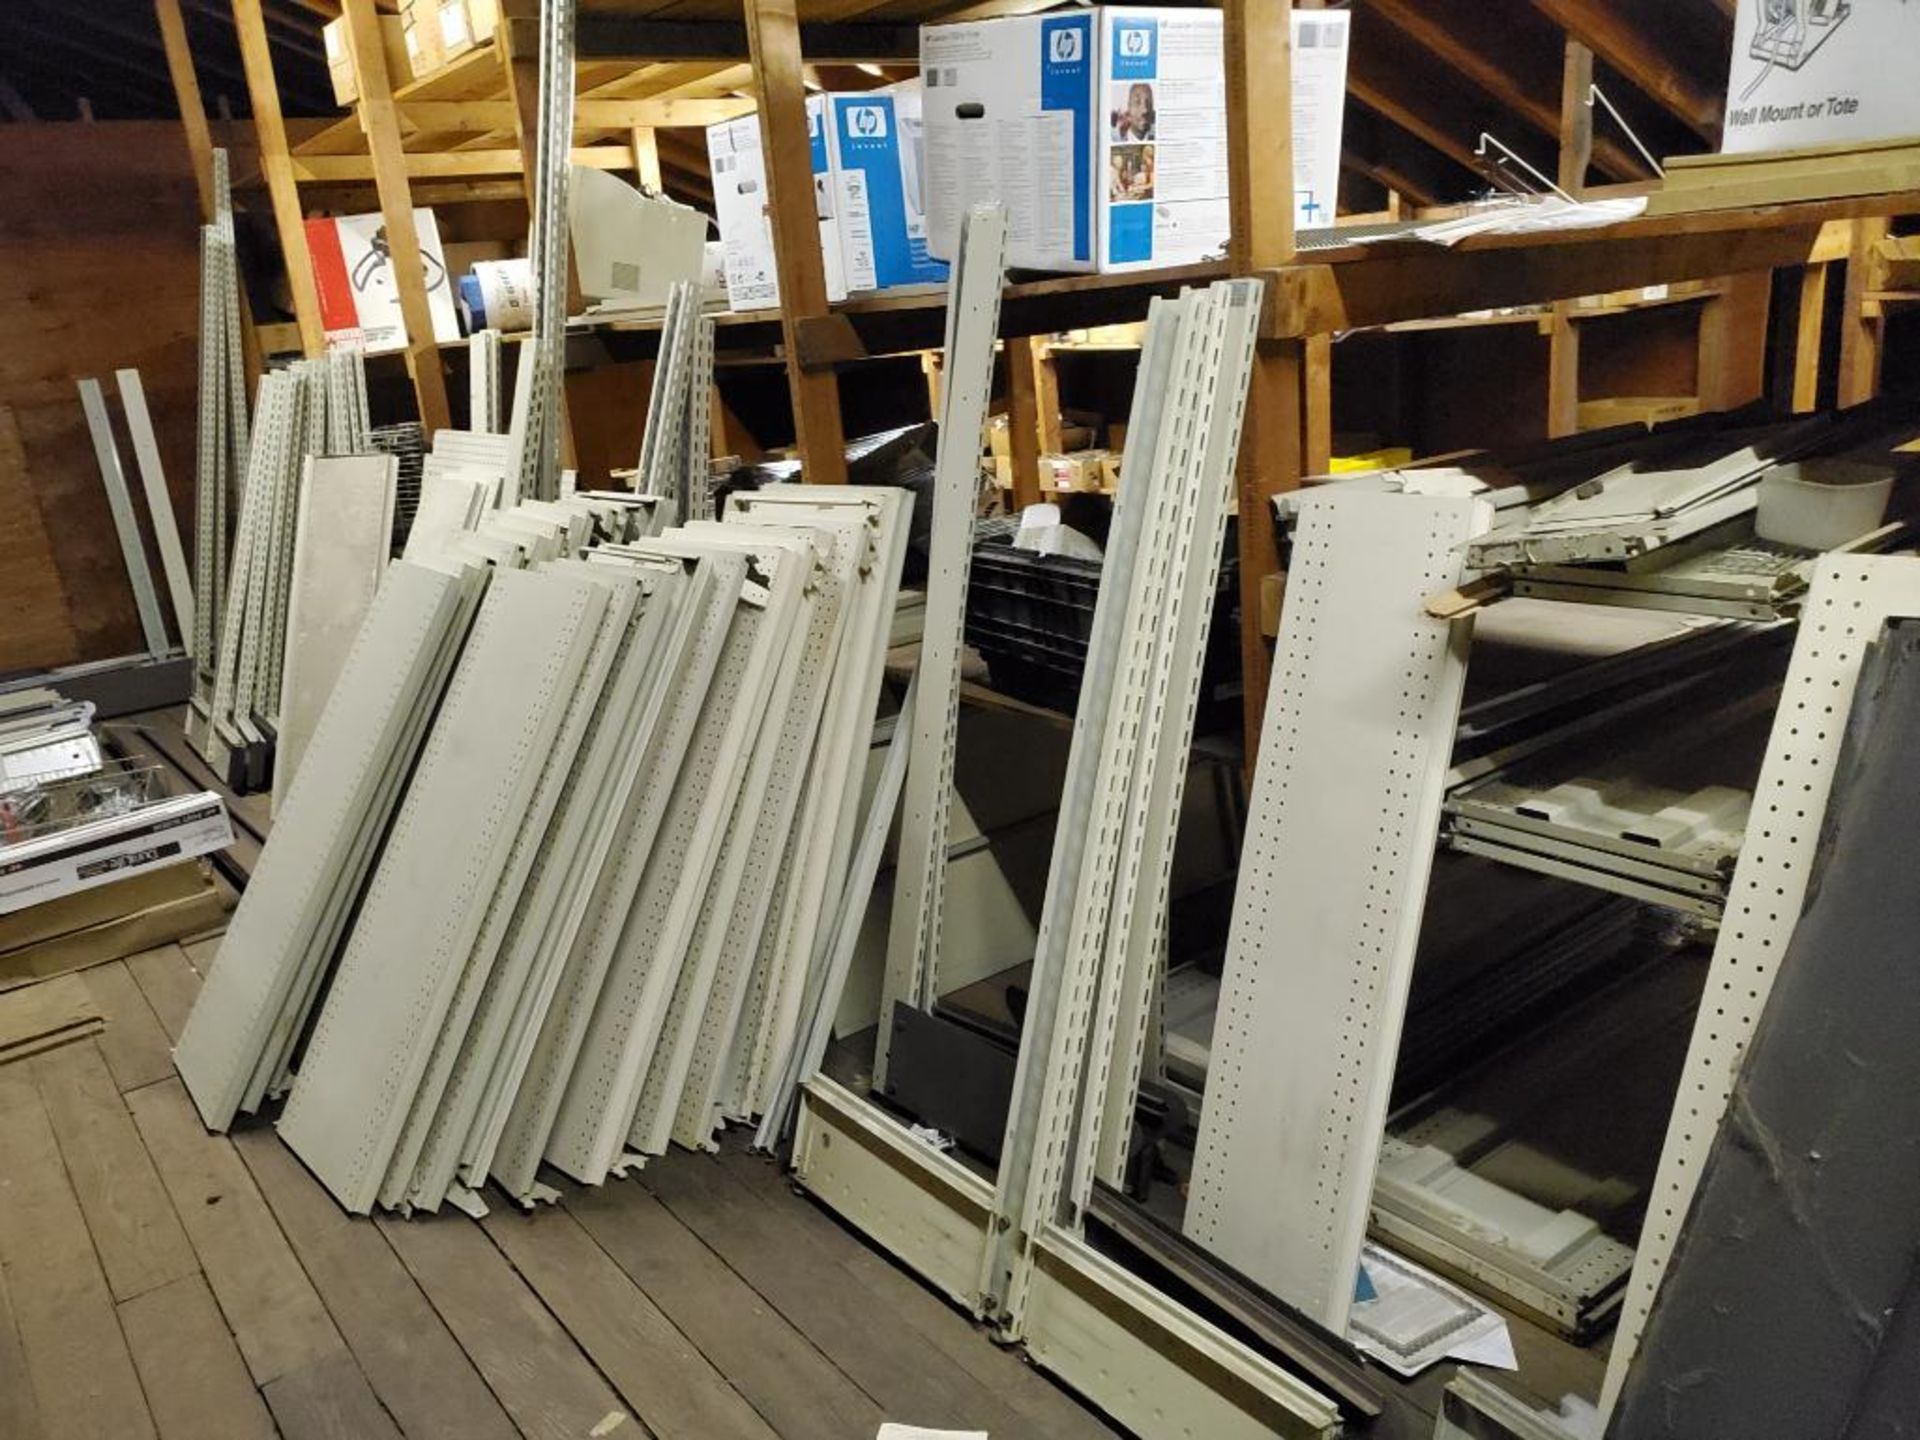 Large assortment of shelving components in attic.